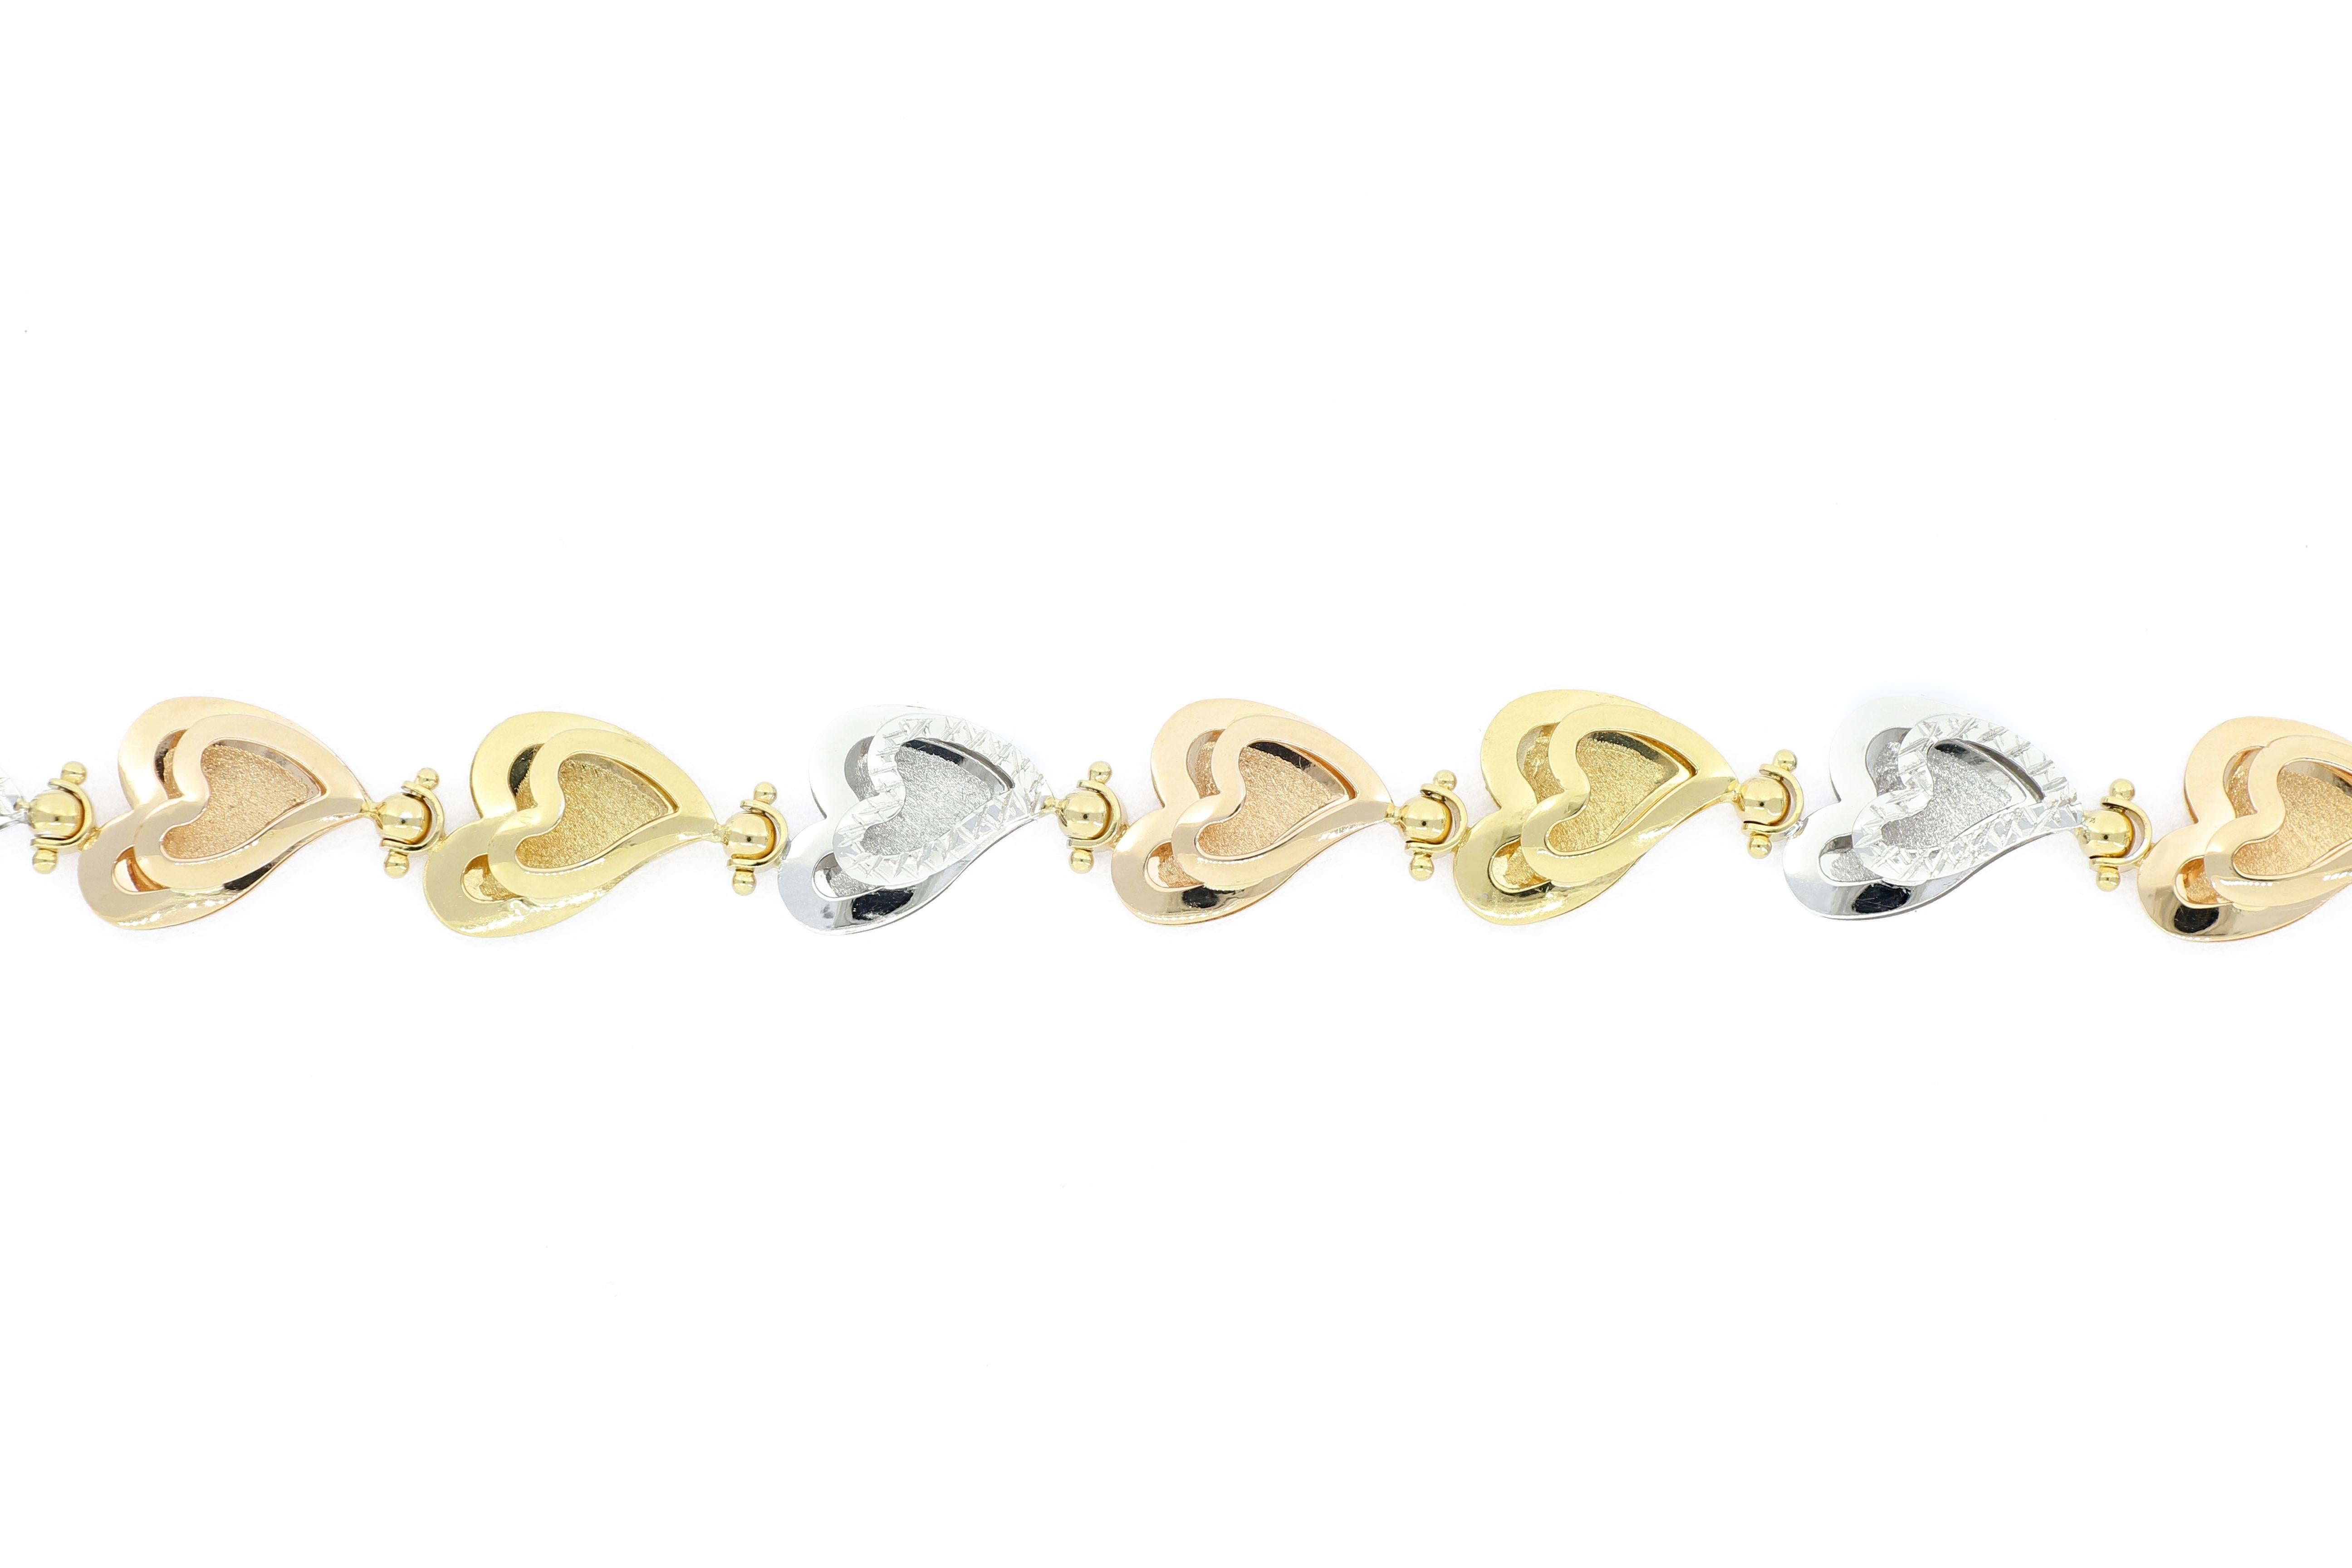 A stylish 18 karat gold bracelet., designed and made in Italy. This tri-colour beautiful bracelet with heart shape pattern, simple and elegant, can match with different outfits.
The company was founded one and a half centuries ago in Macau. The